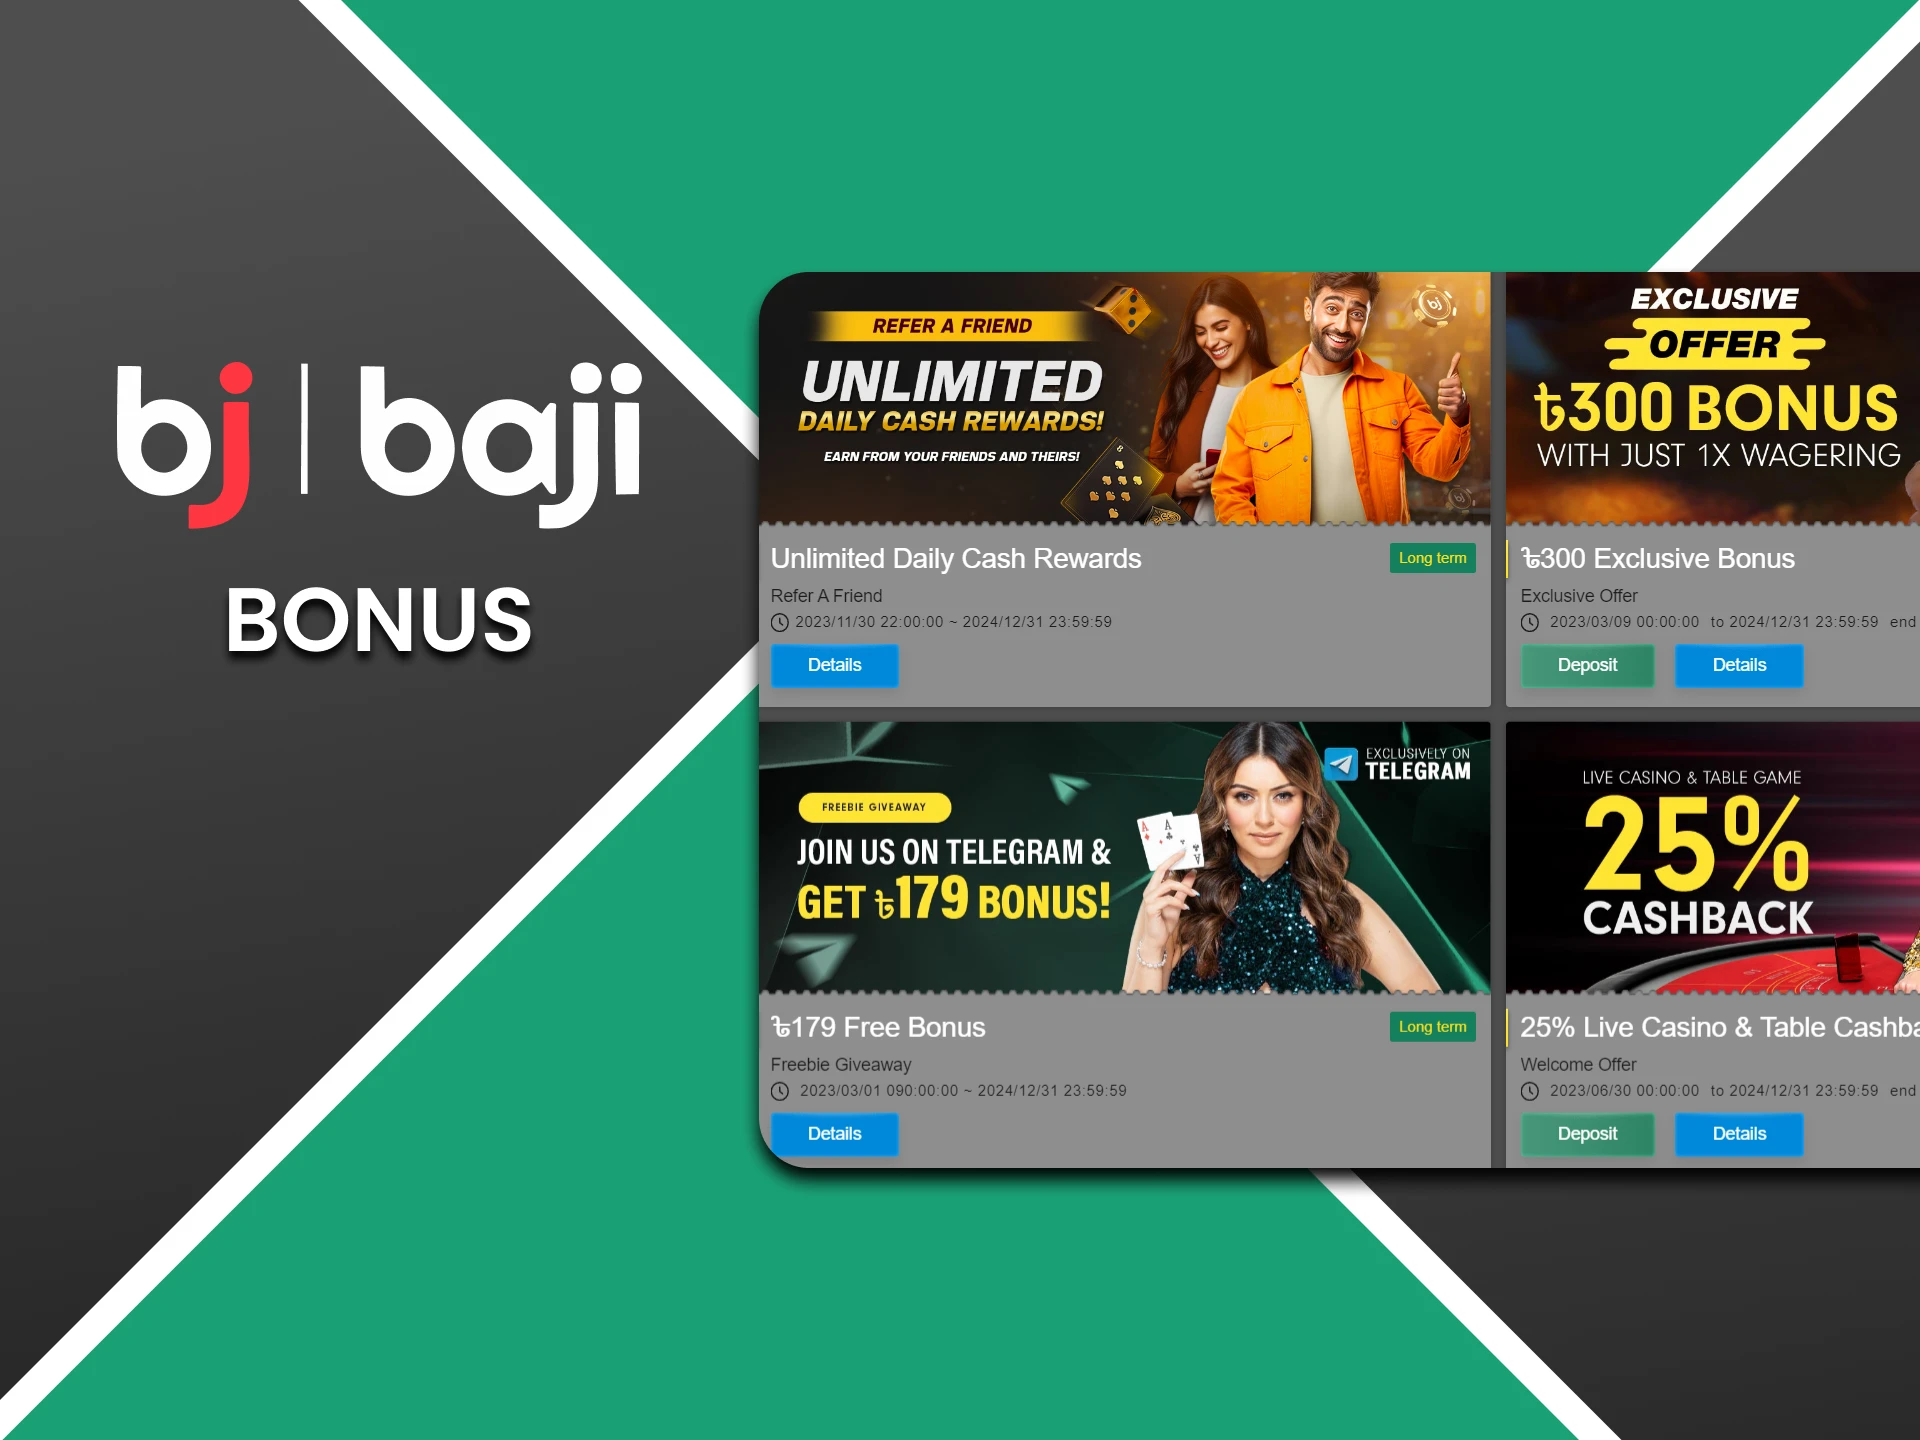 We will tell you about bonuses for the table games section from Baji.